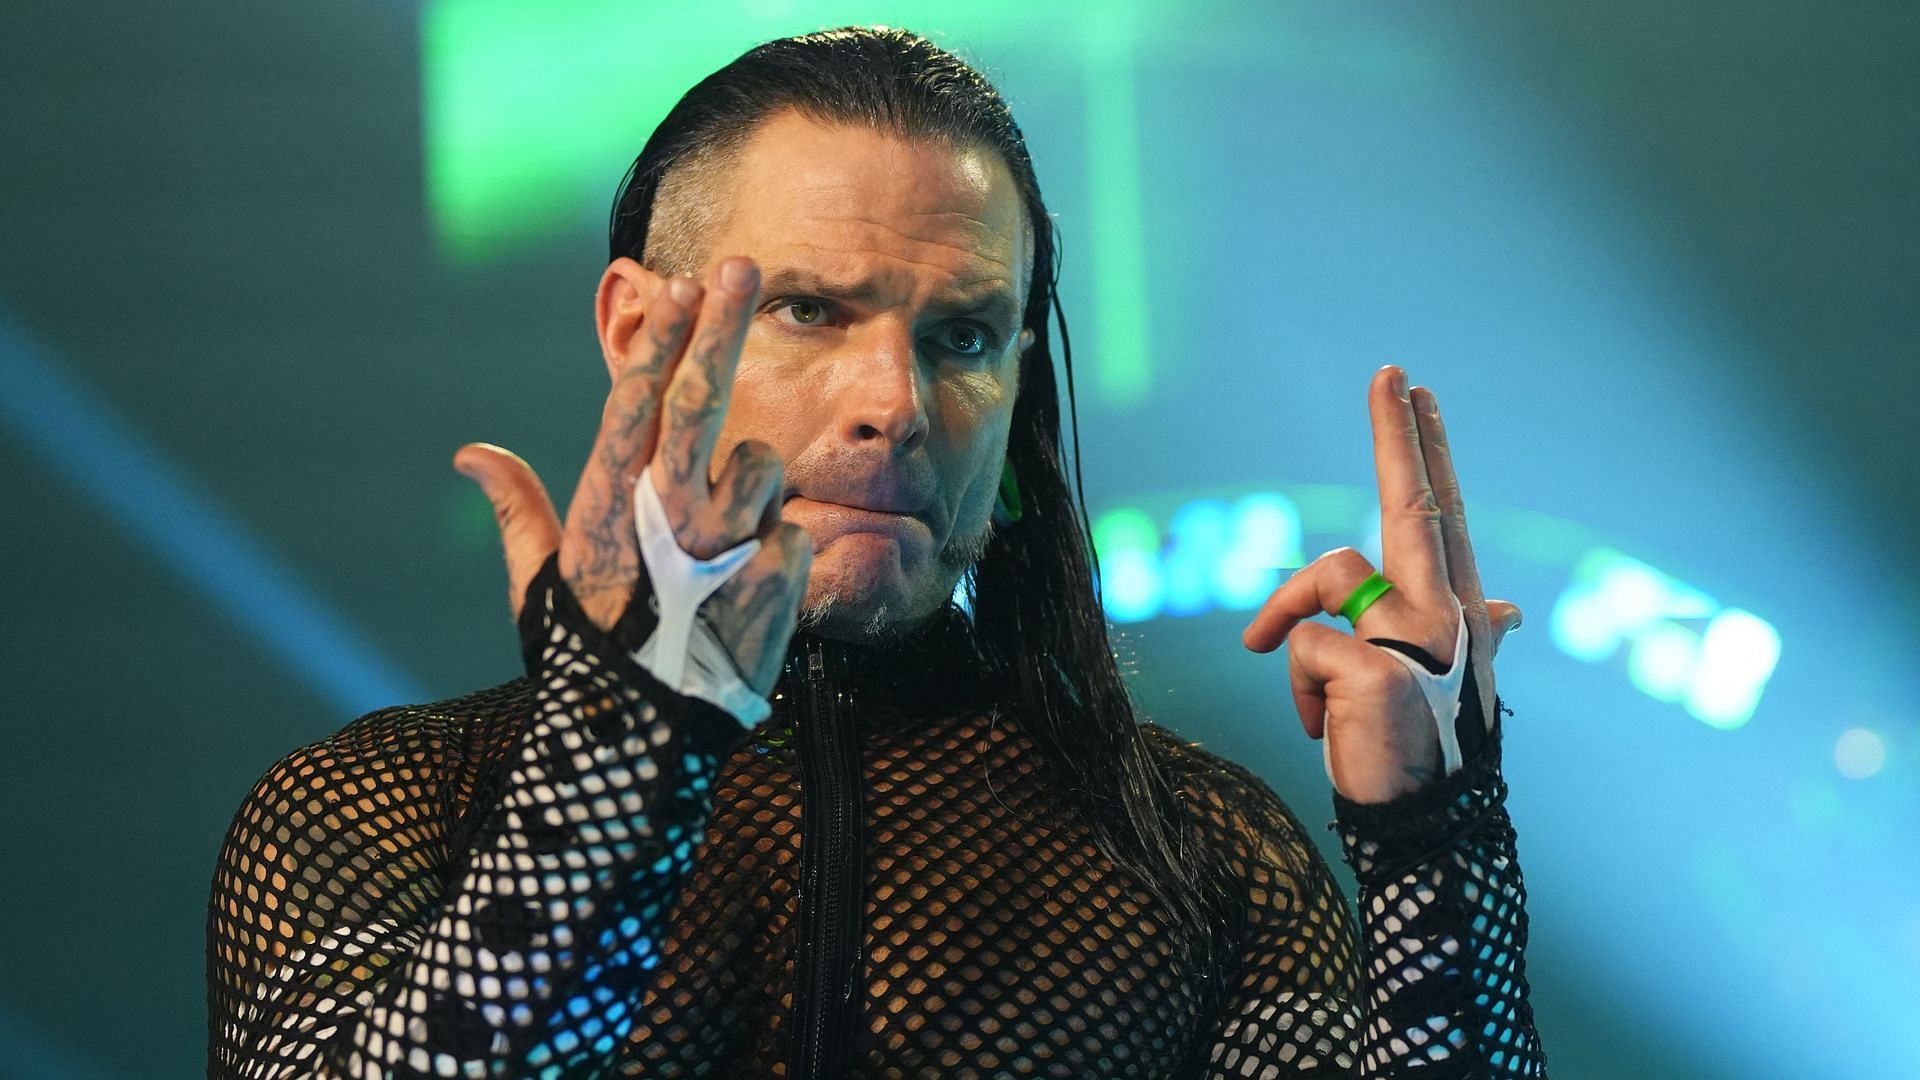 Jeff Hardy has been signed with AEW since March 2022